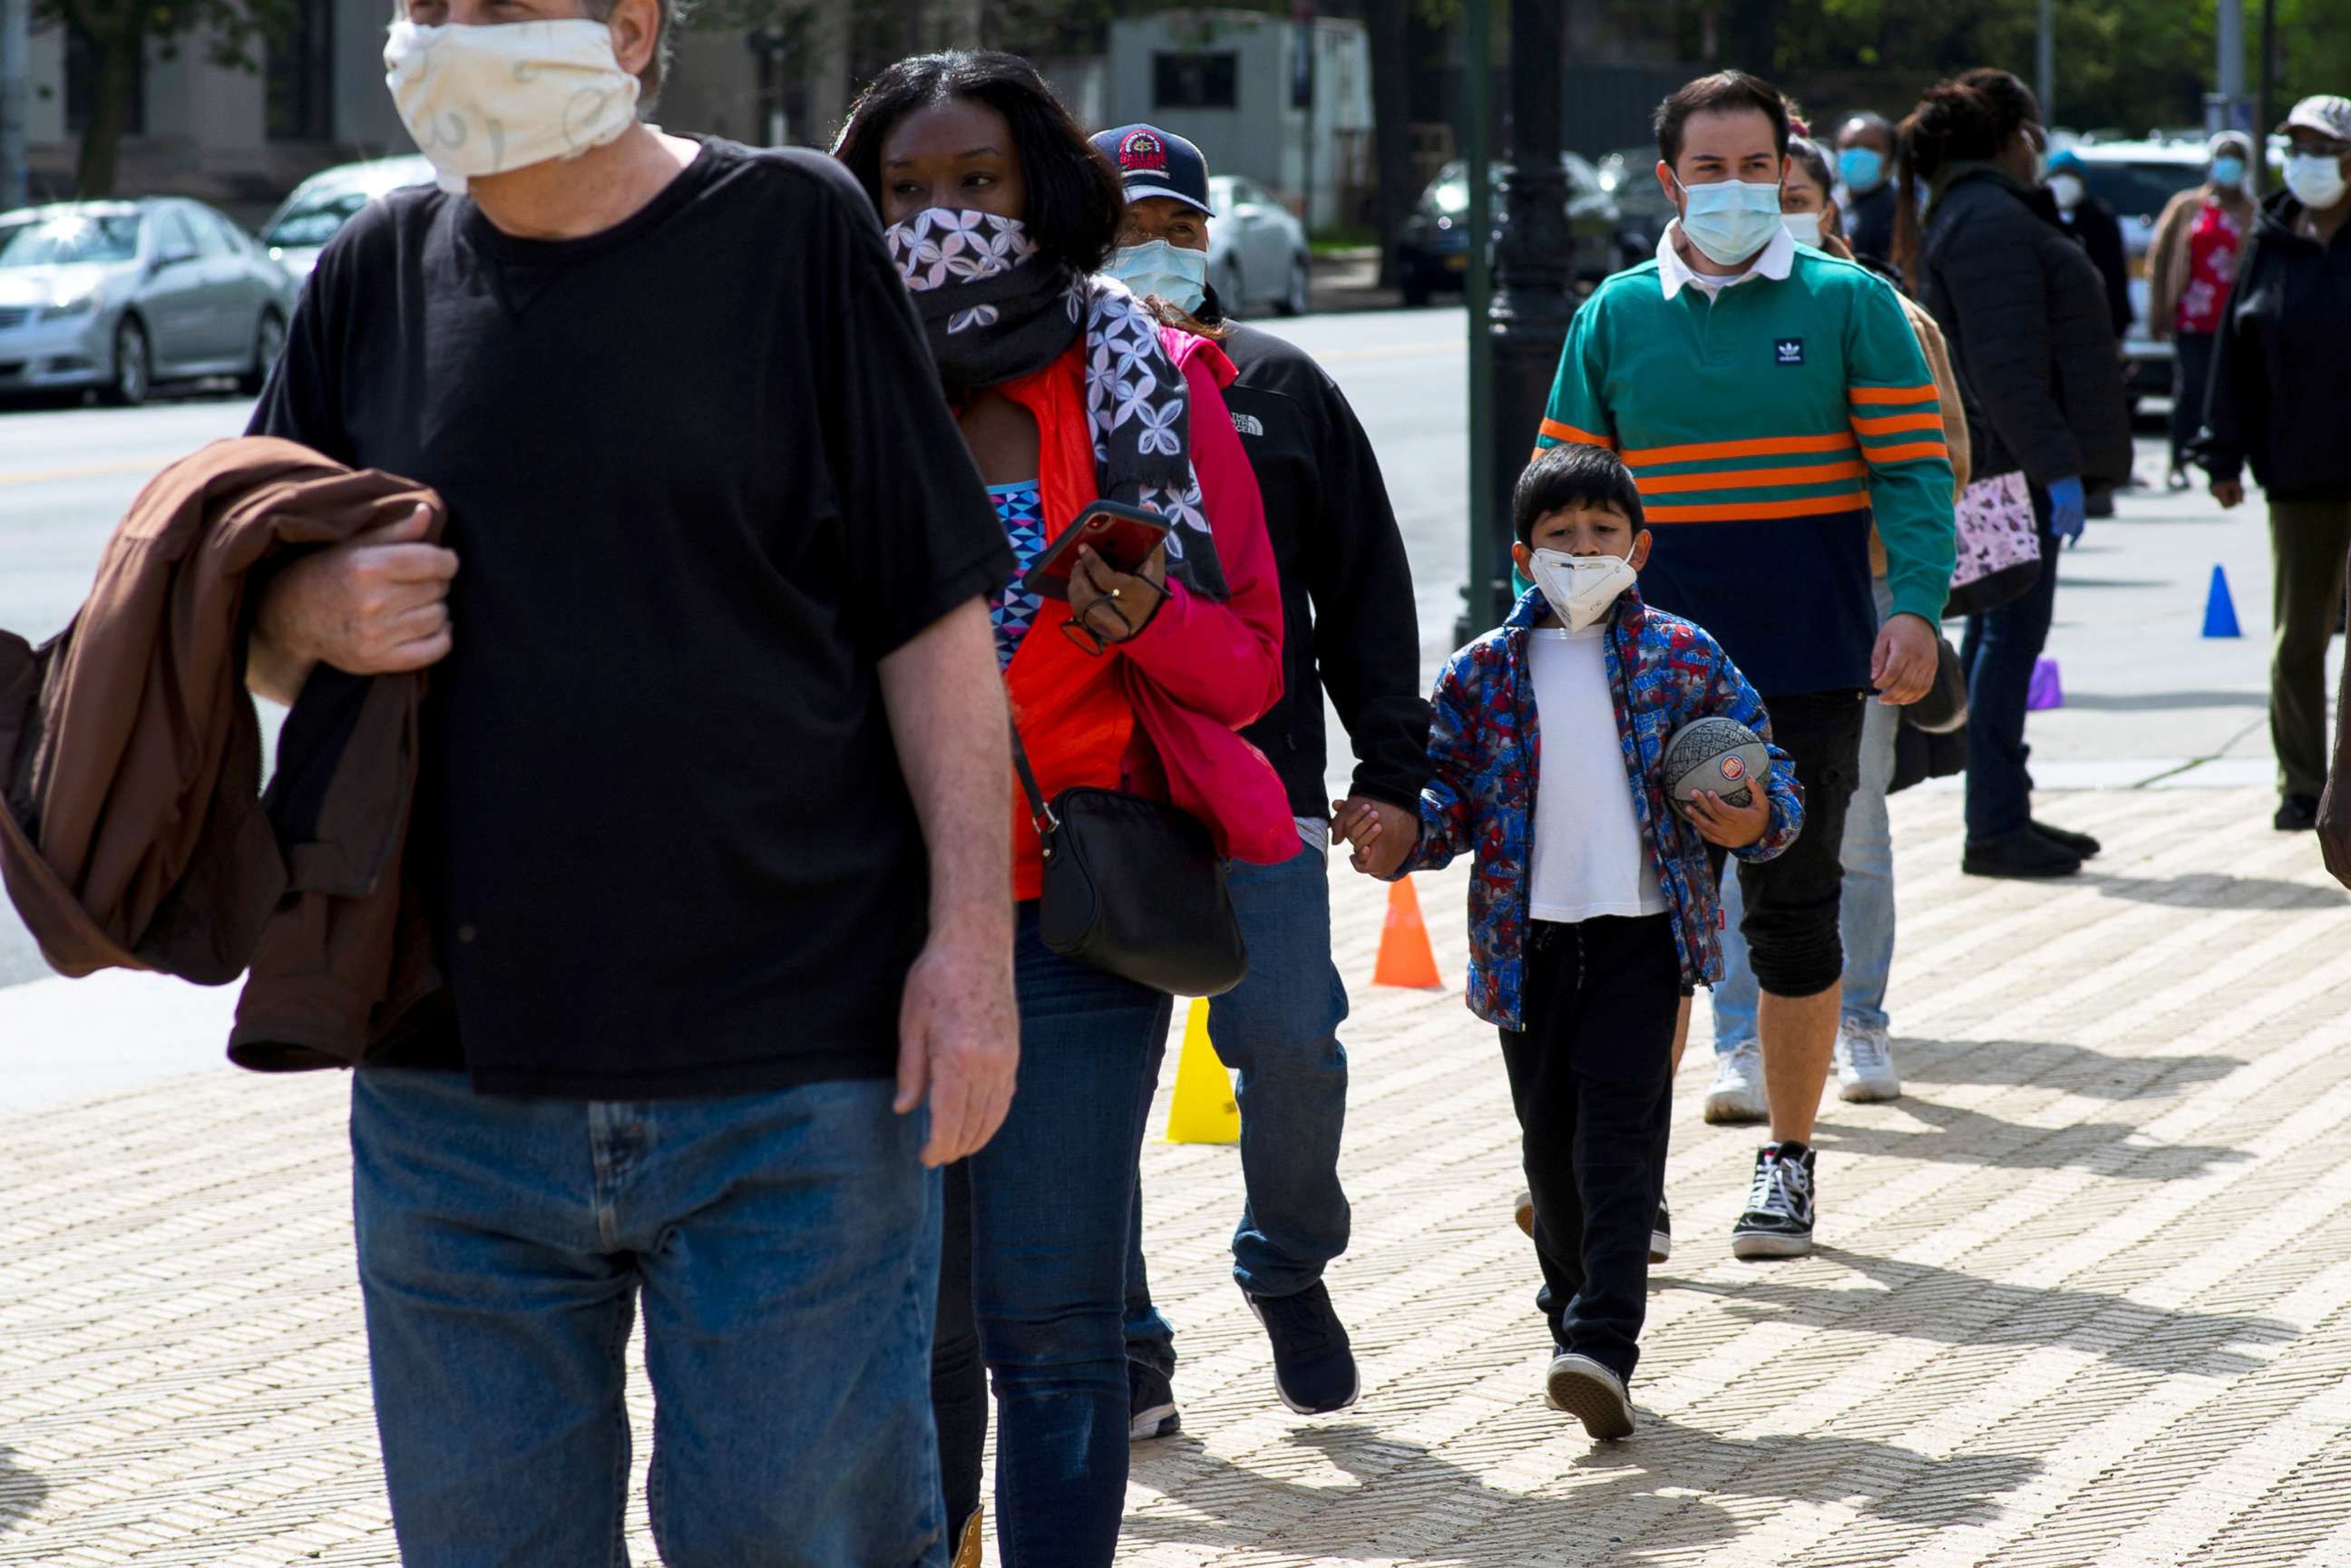 PHOTO: People queue to get free masks distributed by Urban Park Rangers at Grand Army Plaza, during the outbreak of the coronavirus disease (COVID-19) in Brooklyn, New York, May 3, 2020. 